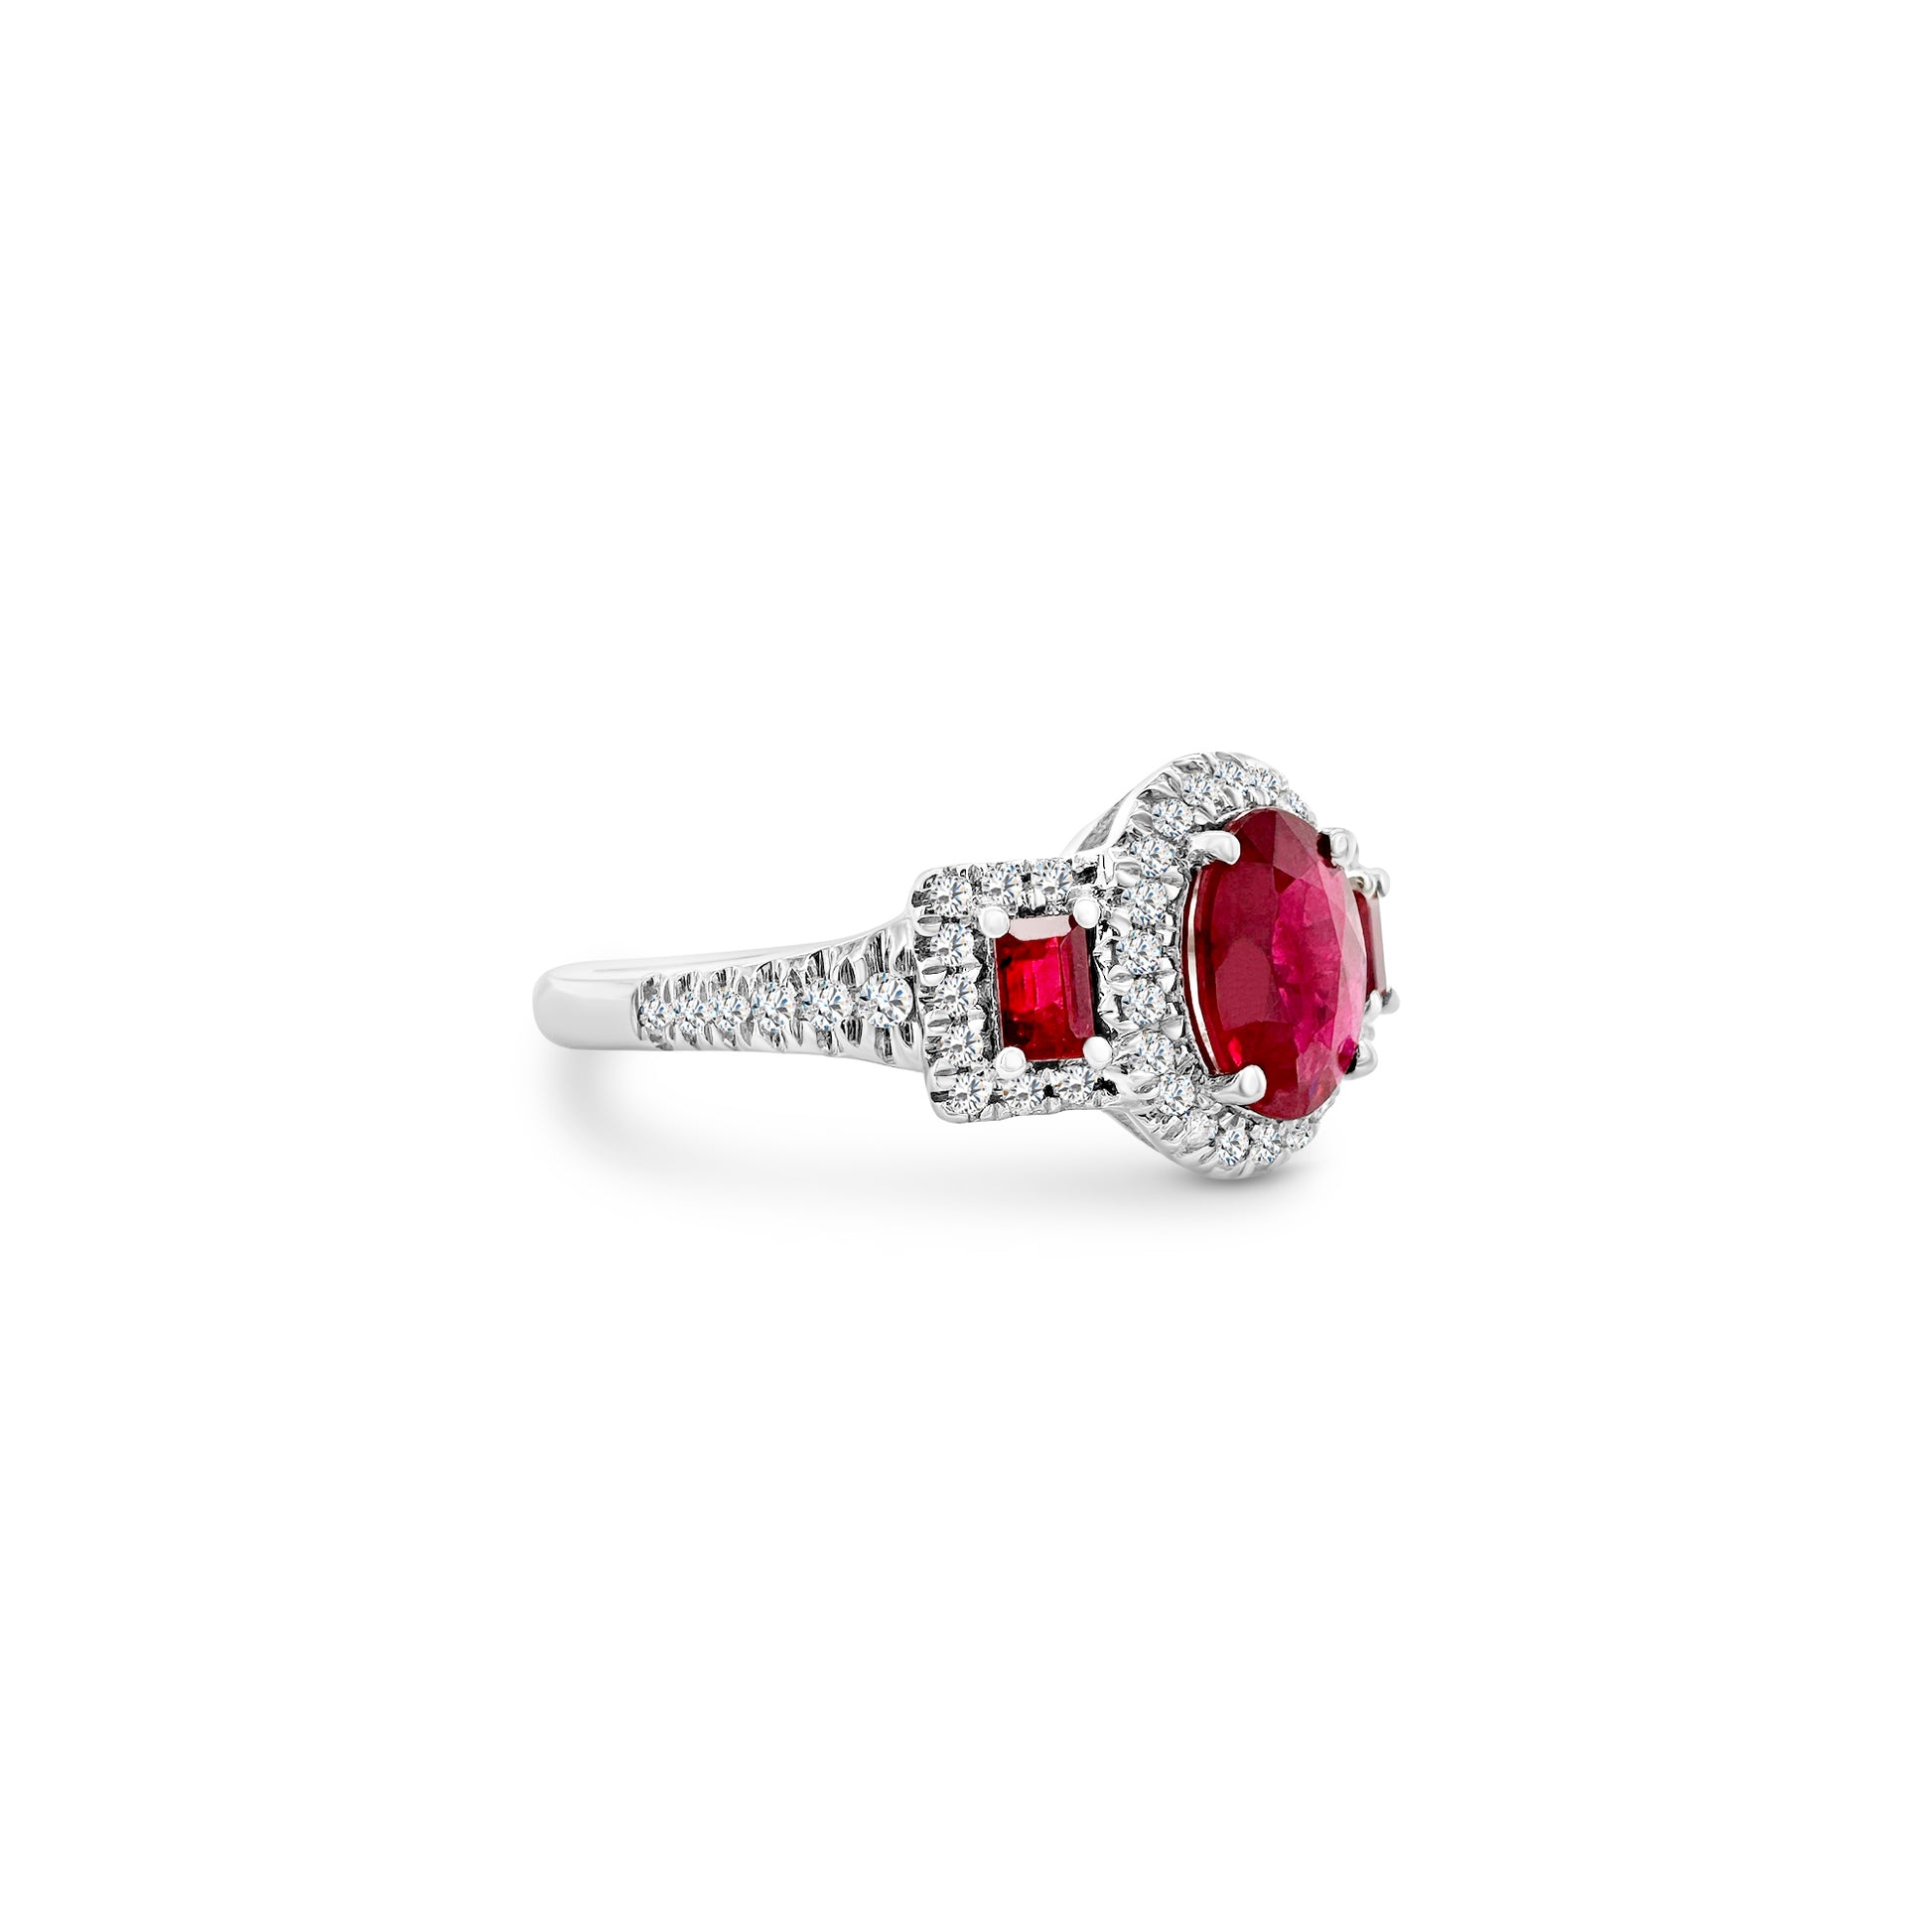 "Ruby & Diamond Trilogy Halo Ring, exquisite ruby ring, stunning diamond ring, elegant halo ring, luxurious gemstone ring, statement jewelry piece, breathtaking ruby and diamond ring, dazzling gemstone halo ring, fine jewelry masterpiece, exquisite ruby and diamond jewelry, high-quality gemstone ring"